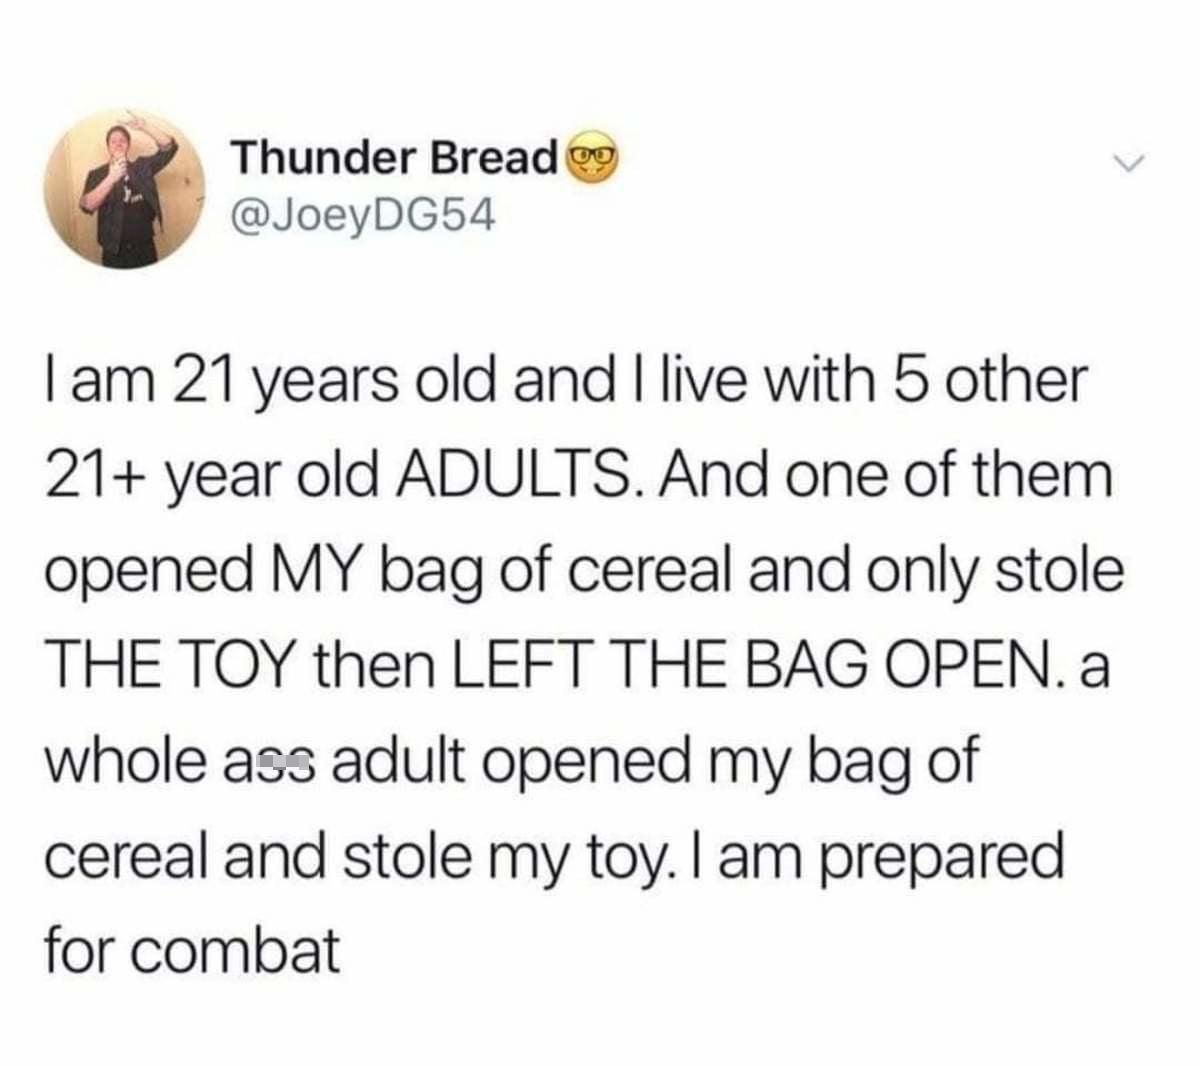 daily dose of pics and memes - Culture - Thunder Bread I am 21 years old and I live with 5 other 21 year old Adults. And one of them opened My bag of cereal and only stole The Toy then Left The Bag Open. a whole ass adult opened my bag of cereal and stole